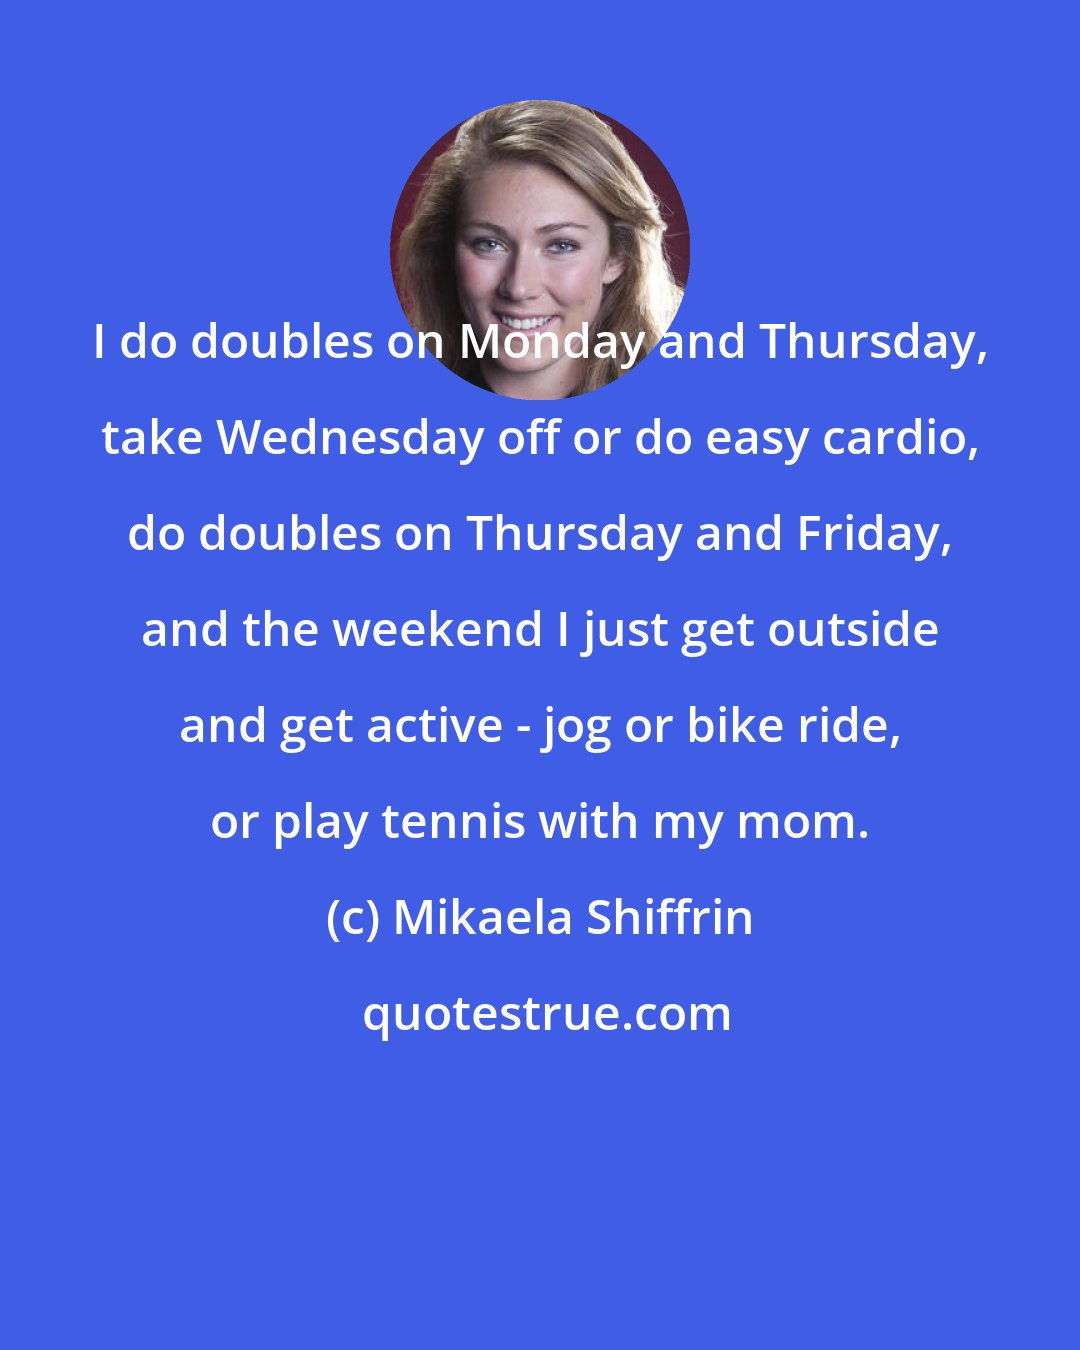 Mikaela Shiffrin: I do doubles on Monday and Thursday, take Wednesday off or do easy cardio, do doubles on Thursday and Friday, and the weekend I just get outside and get active - jog or bike ride, or play tennis with my mom.